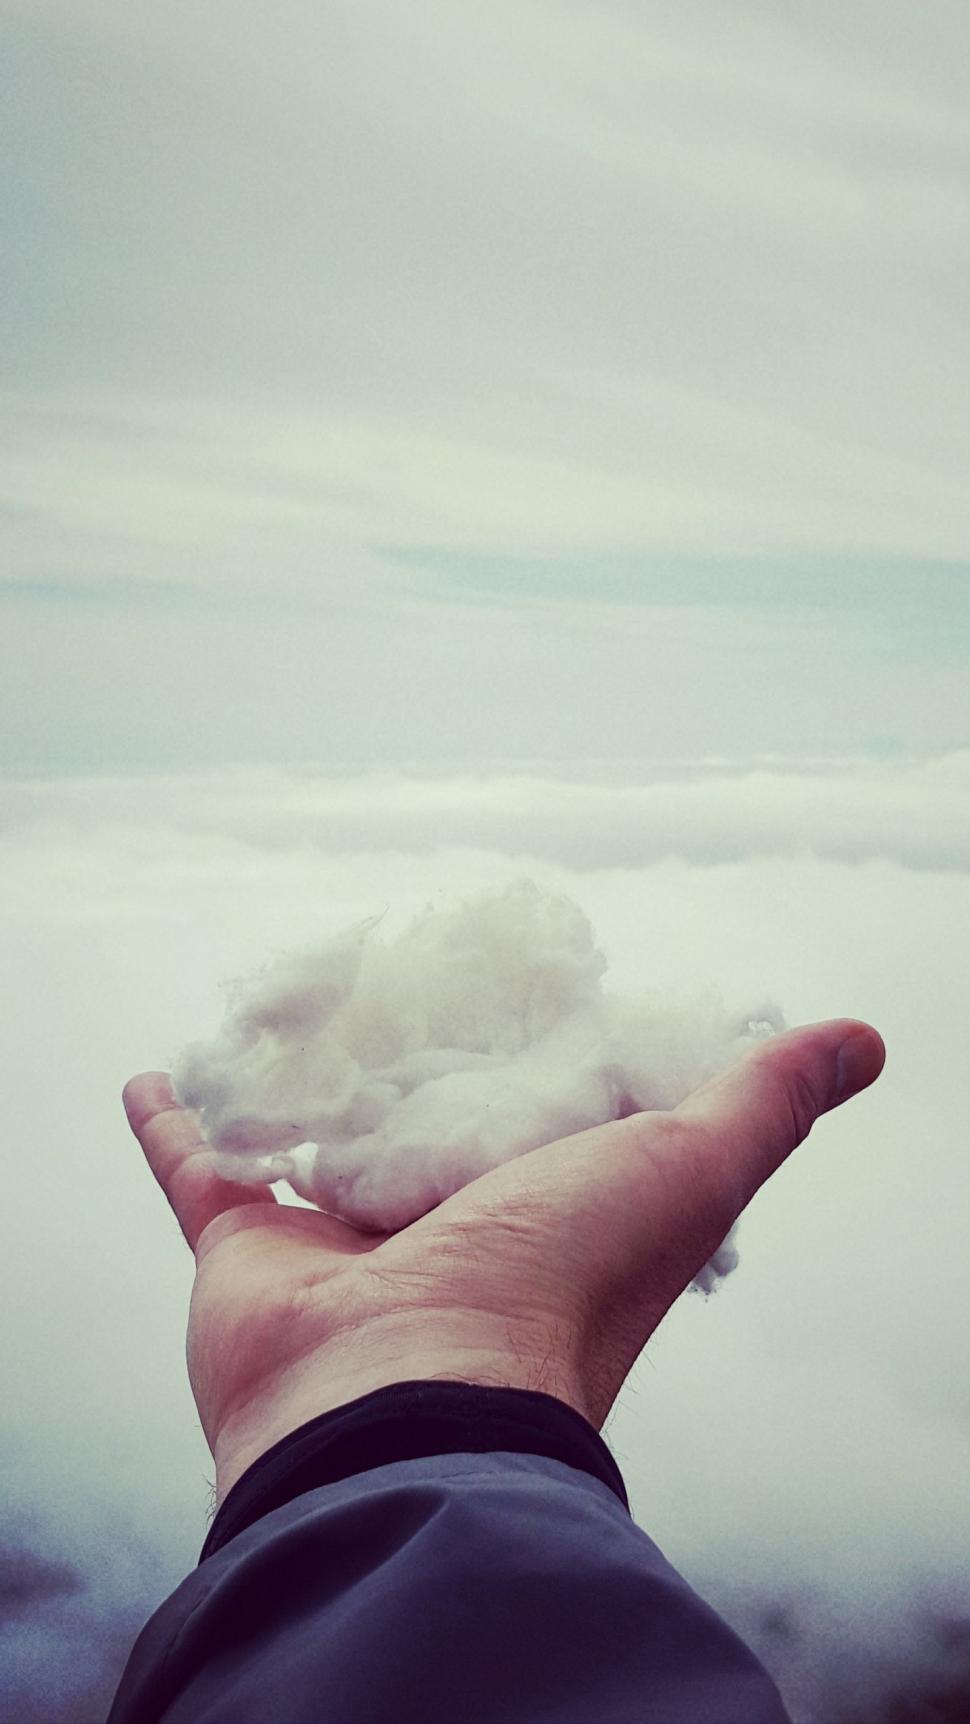 Free Image of Person Holding Out Hand Under Cloudy Sky 